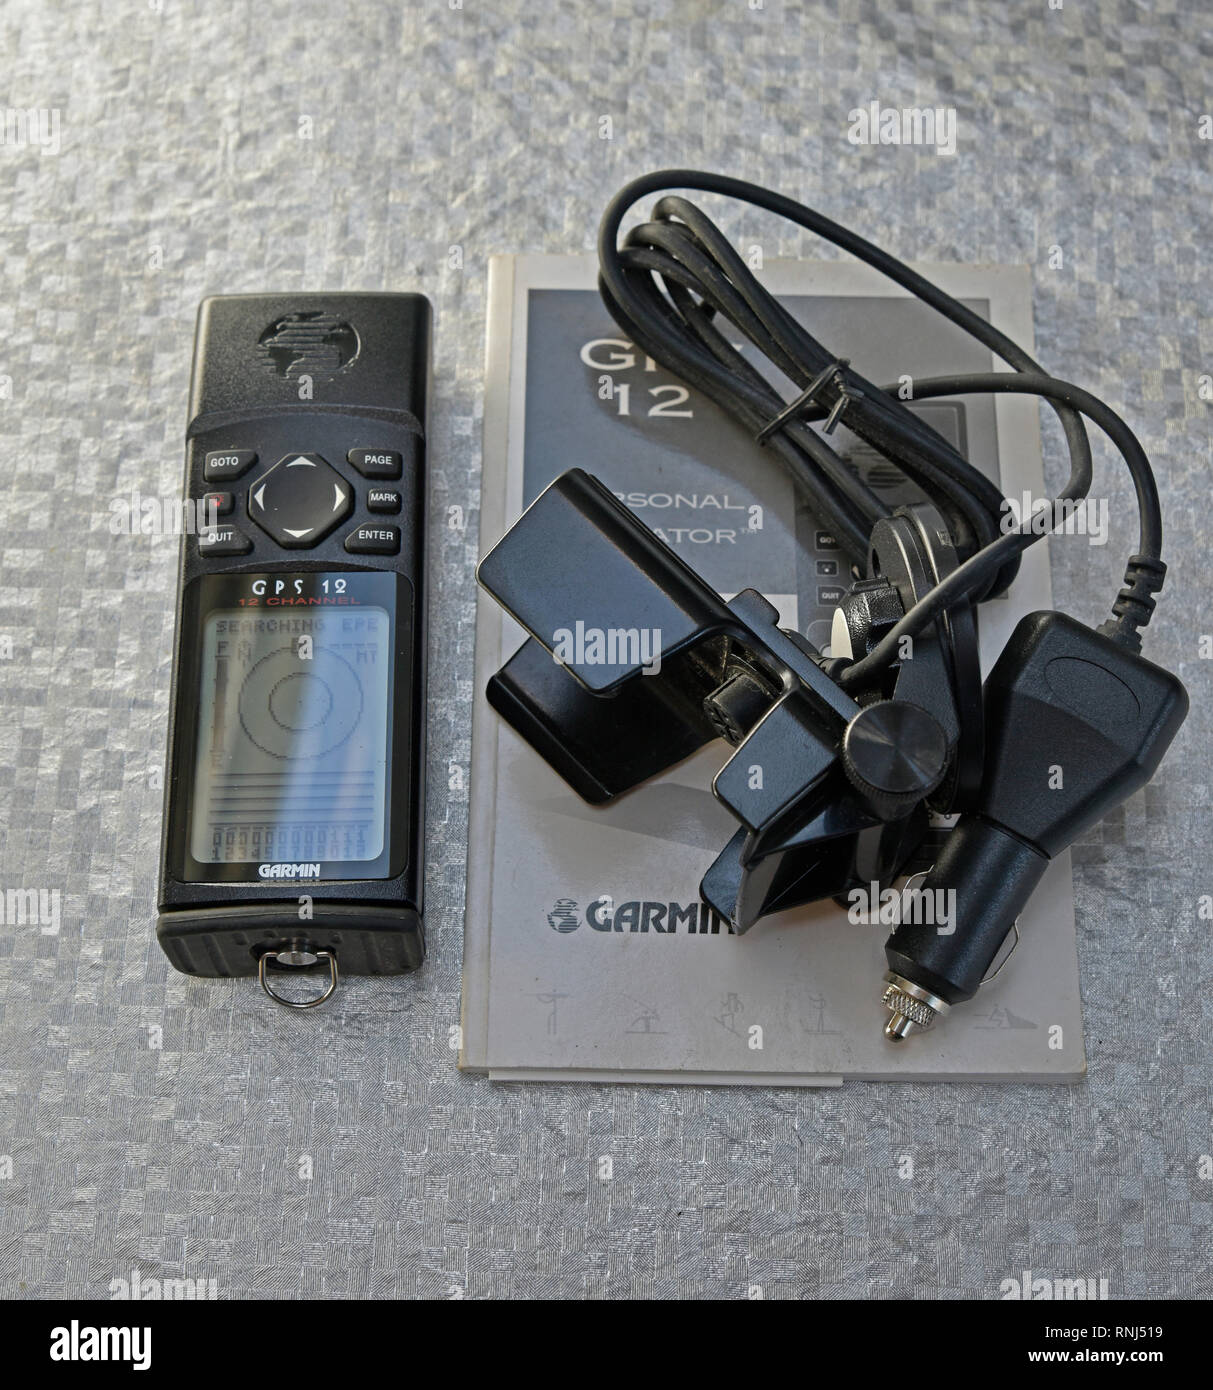 Garmin GPS 12 complete with instruction manual in english and 12v car power  supply and cable and dashboard bracket holder on plain background Stock  Photo - Alamy